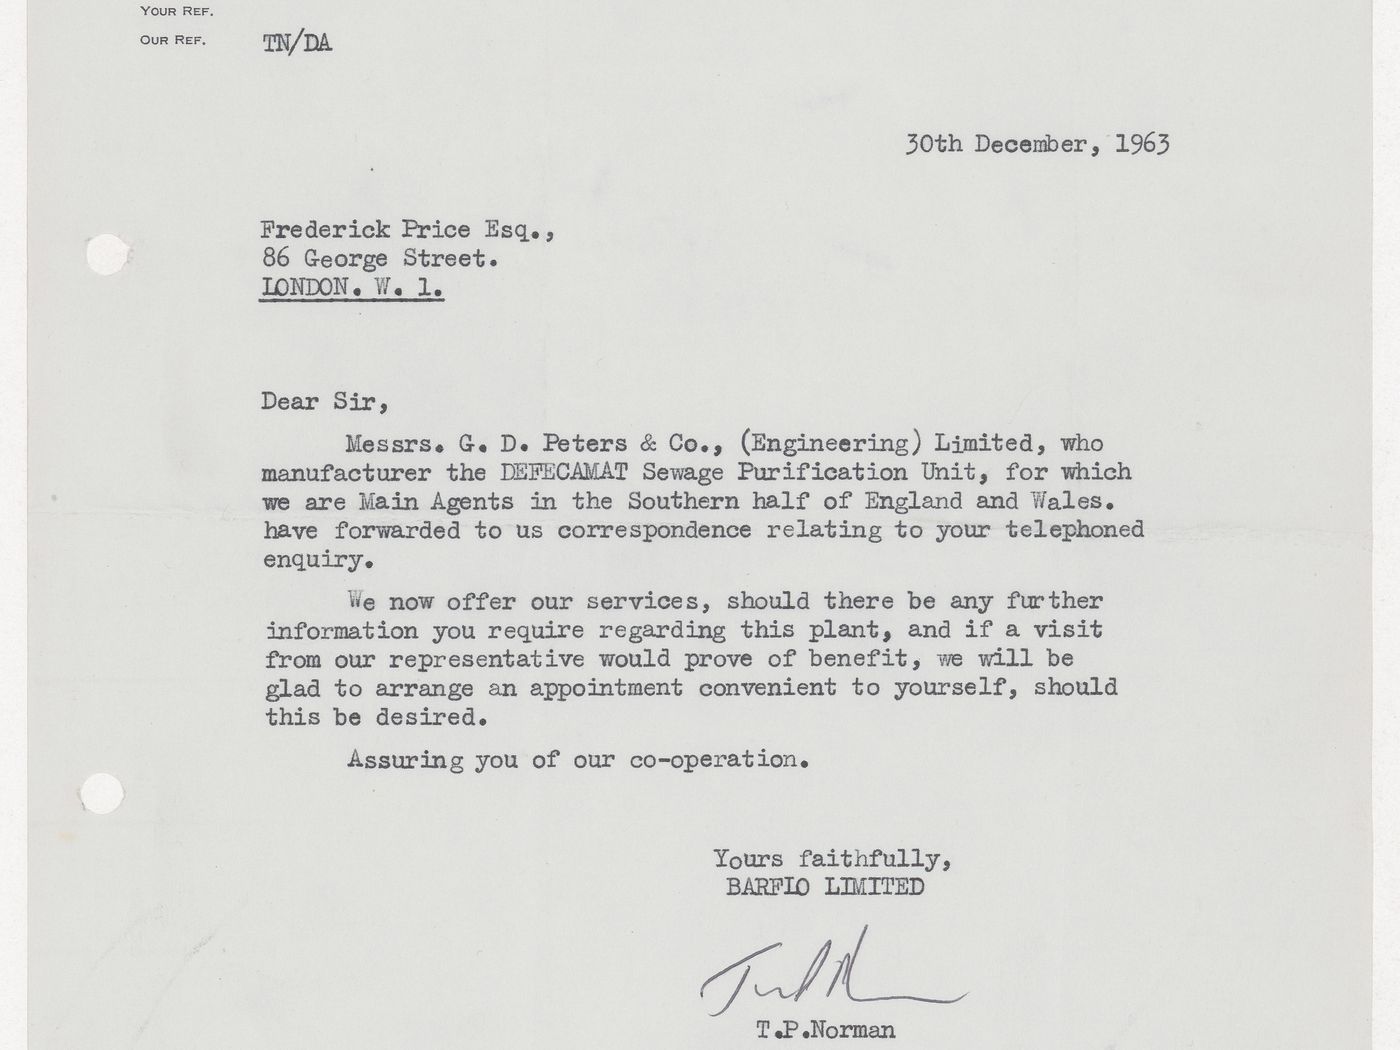 Letter from T.P. Norman of Barflo Limited to Frederick Price regarding the Defecamat Sewage Purification Unit